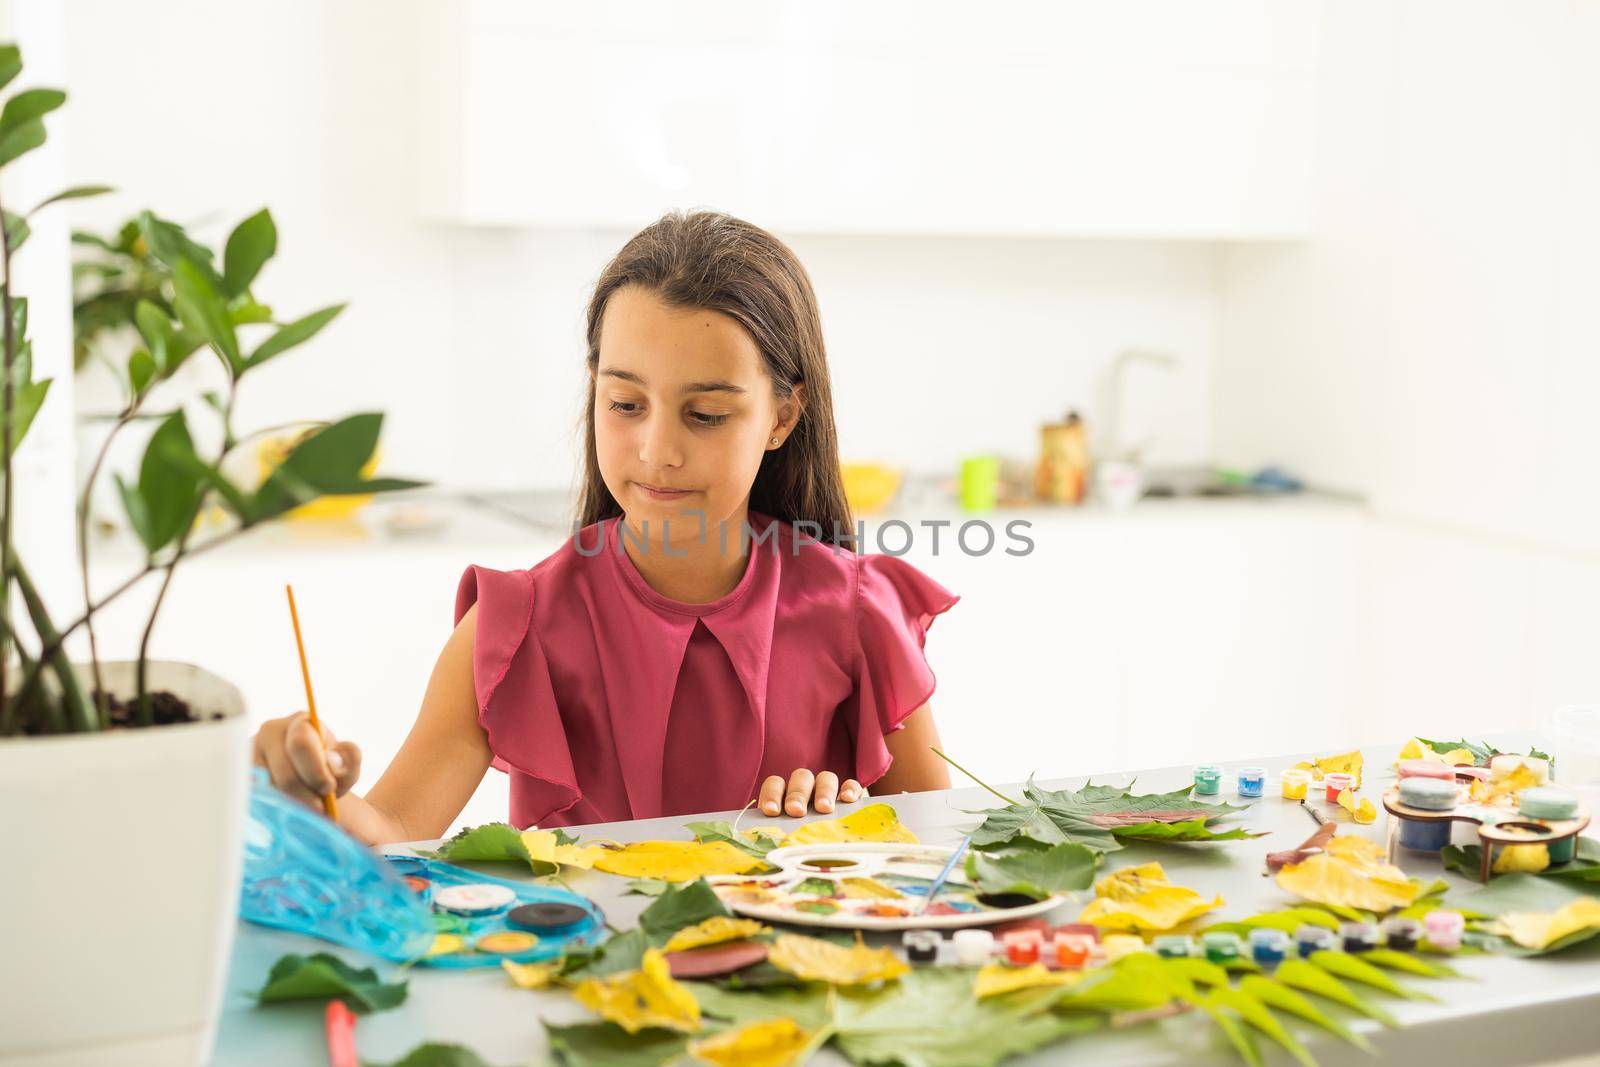 Children's picture made from autumn leaves paint. High quality photo